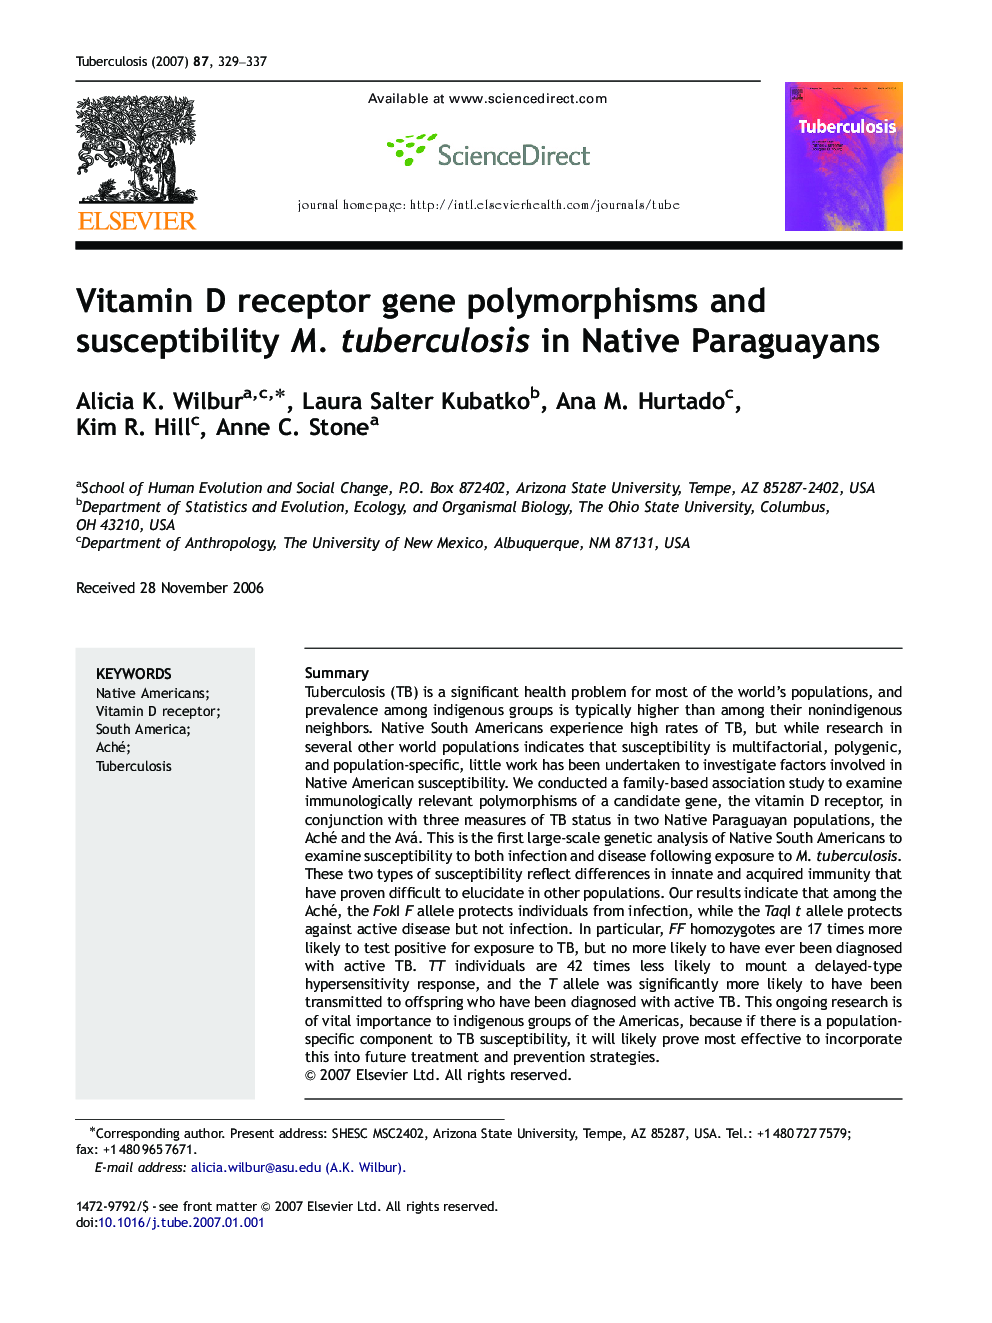 Vitamin D receptor gene polymorphisms and susceptibility M. tuberculosis in Native Paraguayans